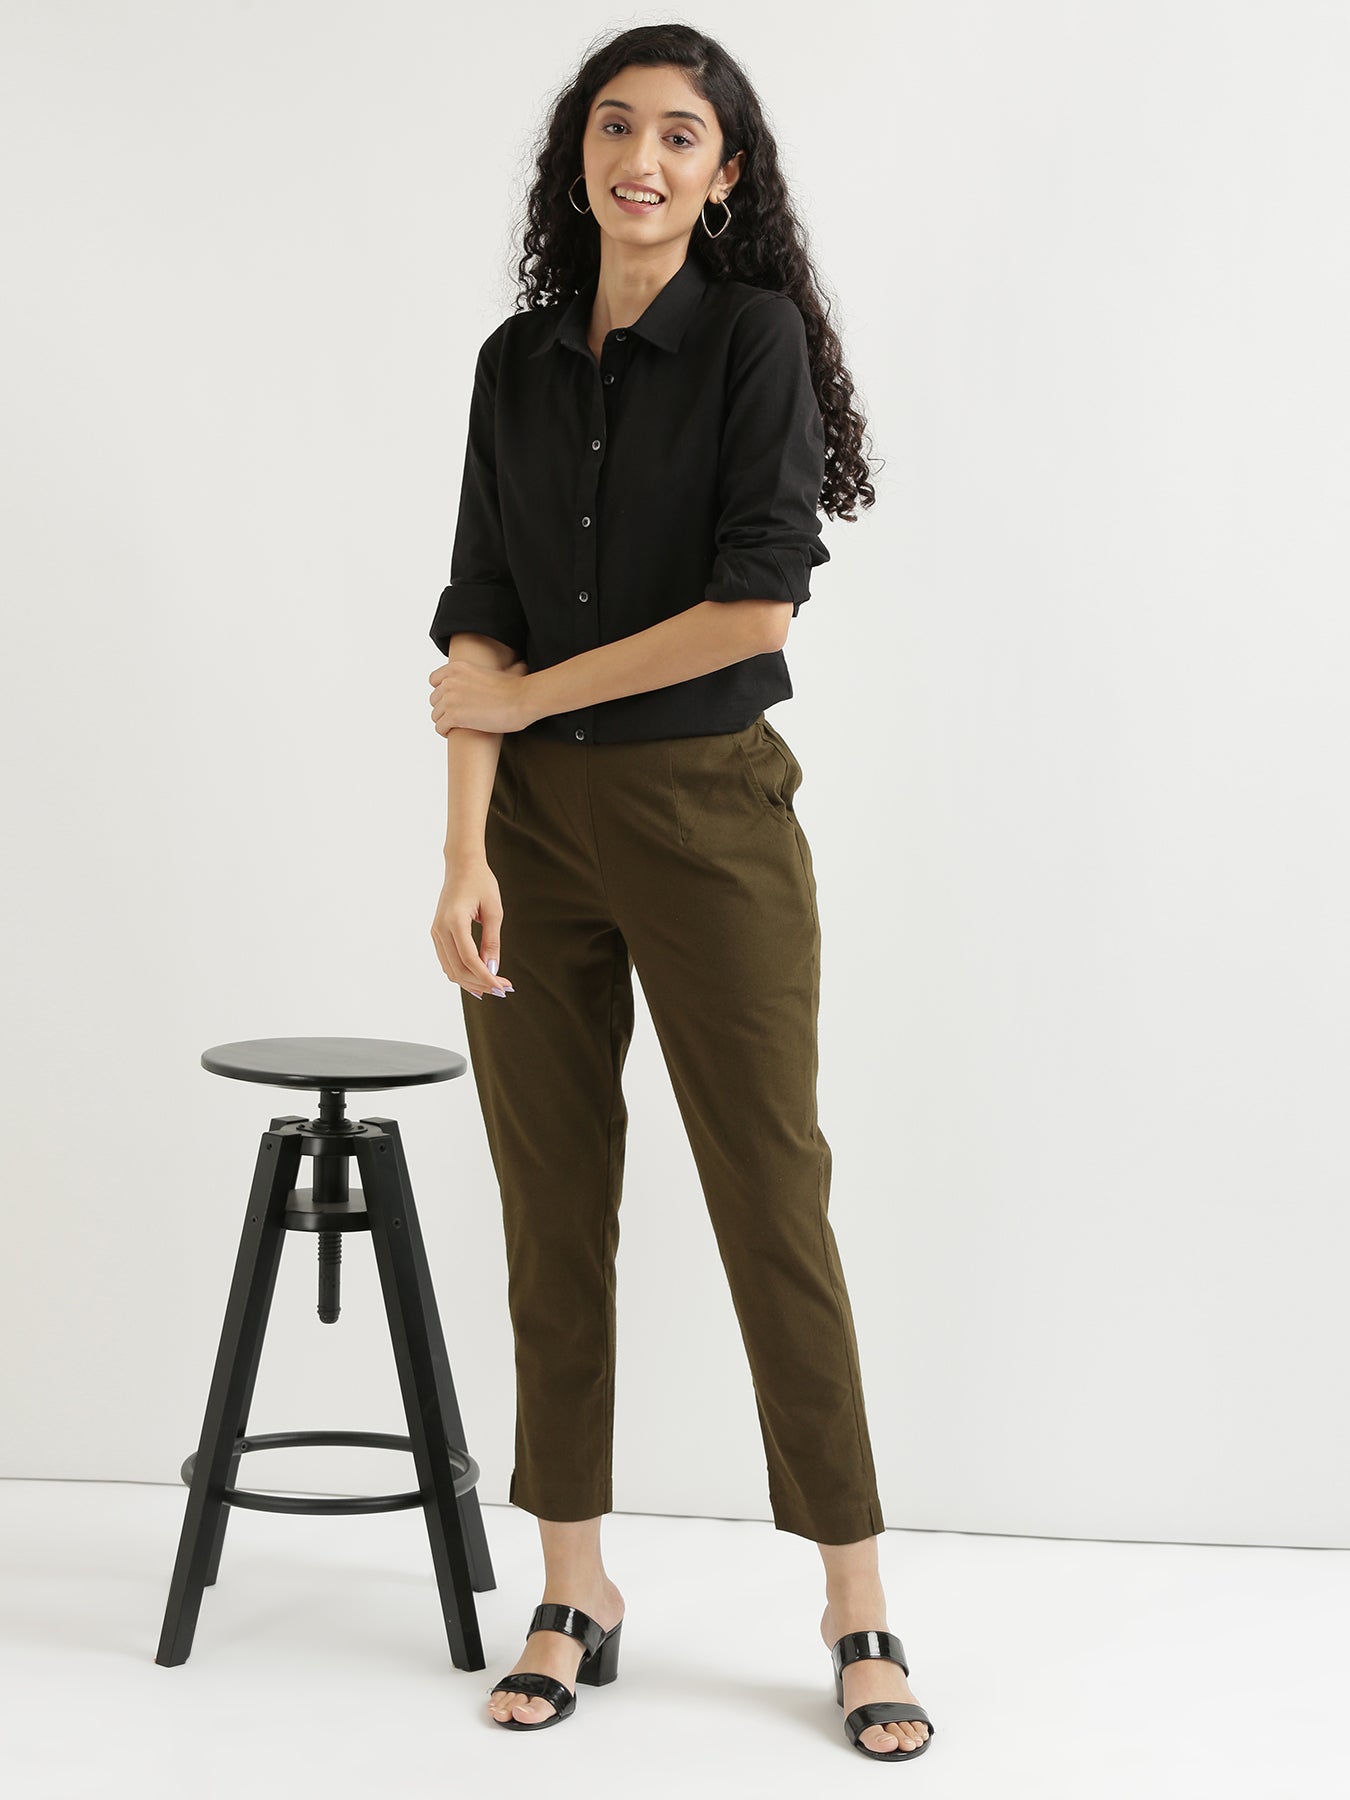 4 Ways To Wear Olive Green Pants: Fall Edition - Style-ish Journey